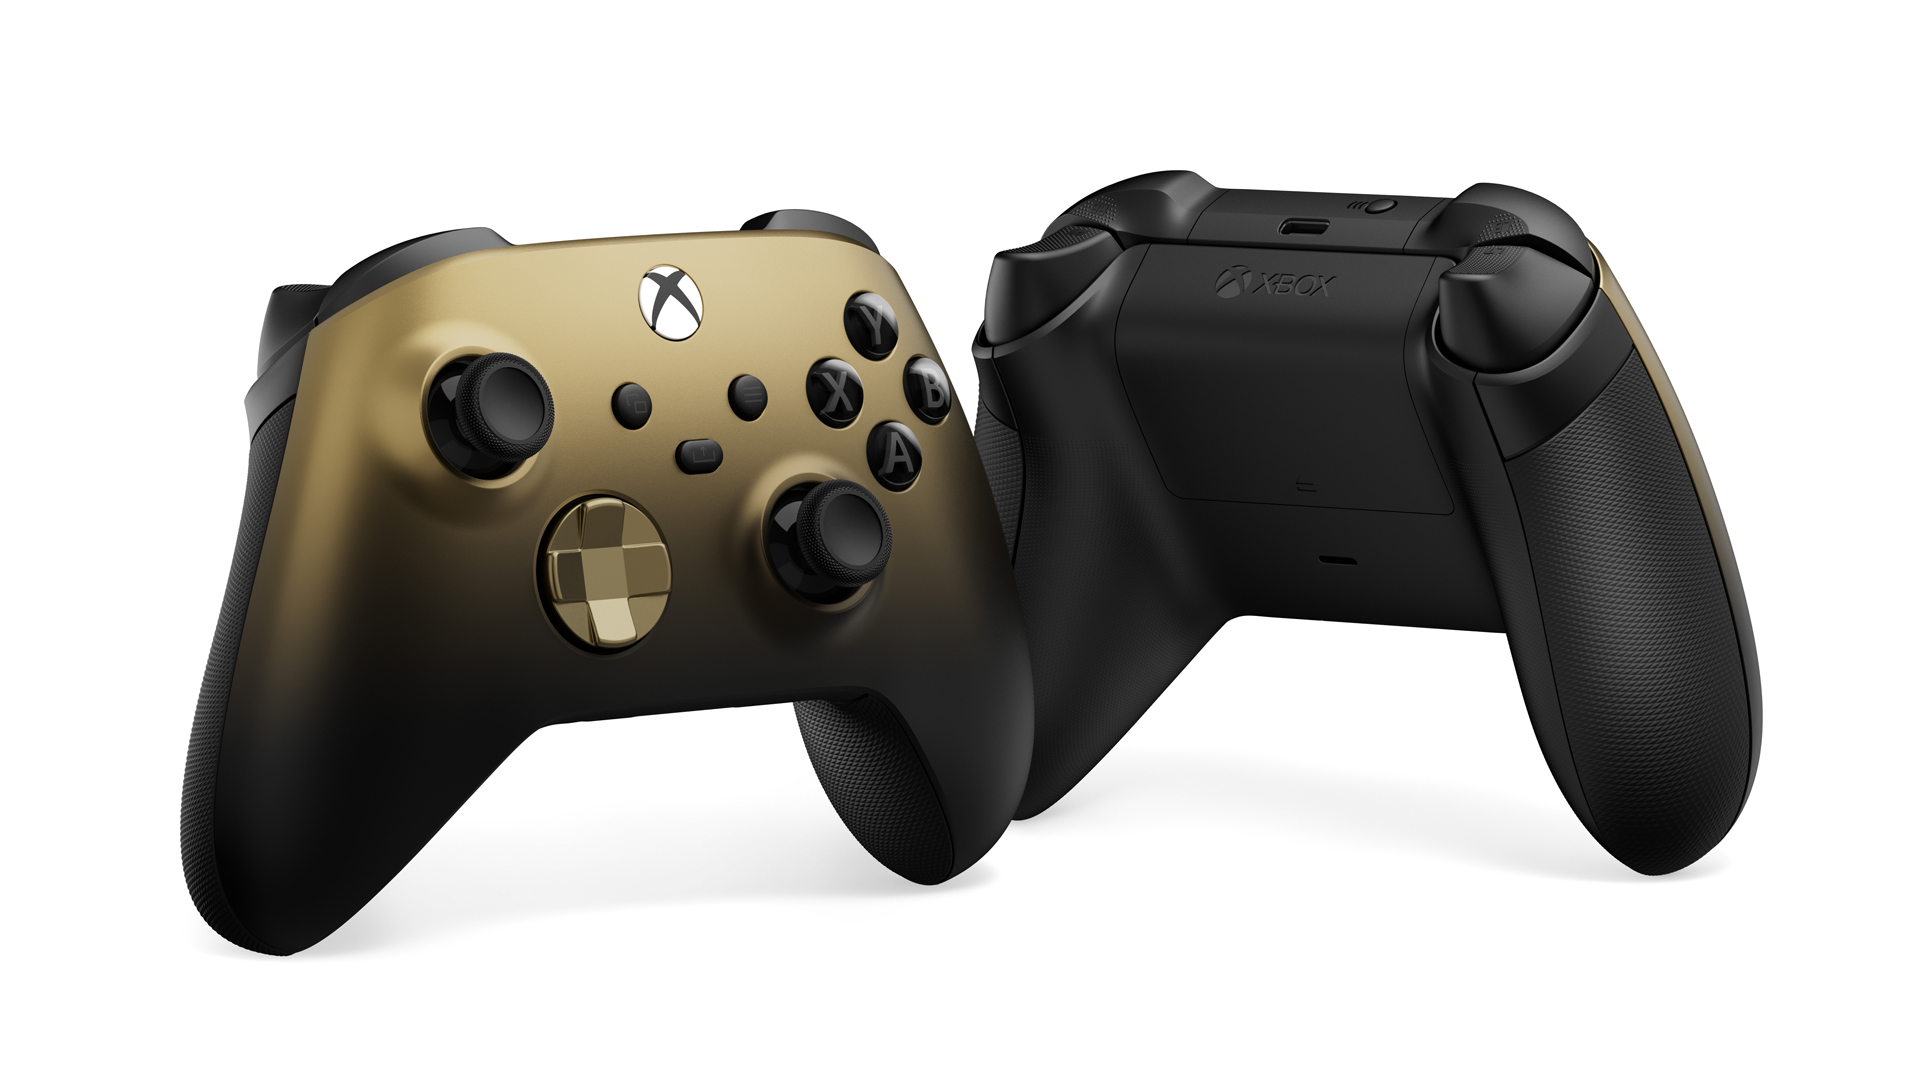 Manette Xbox Gold Shadow